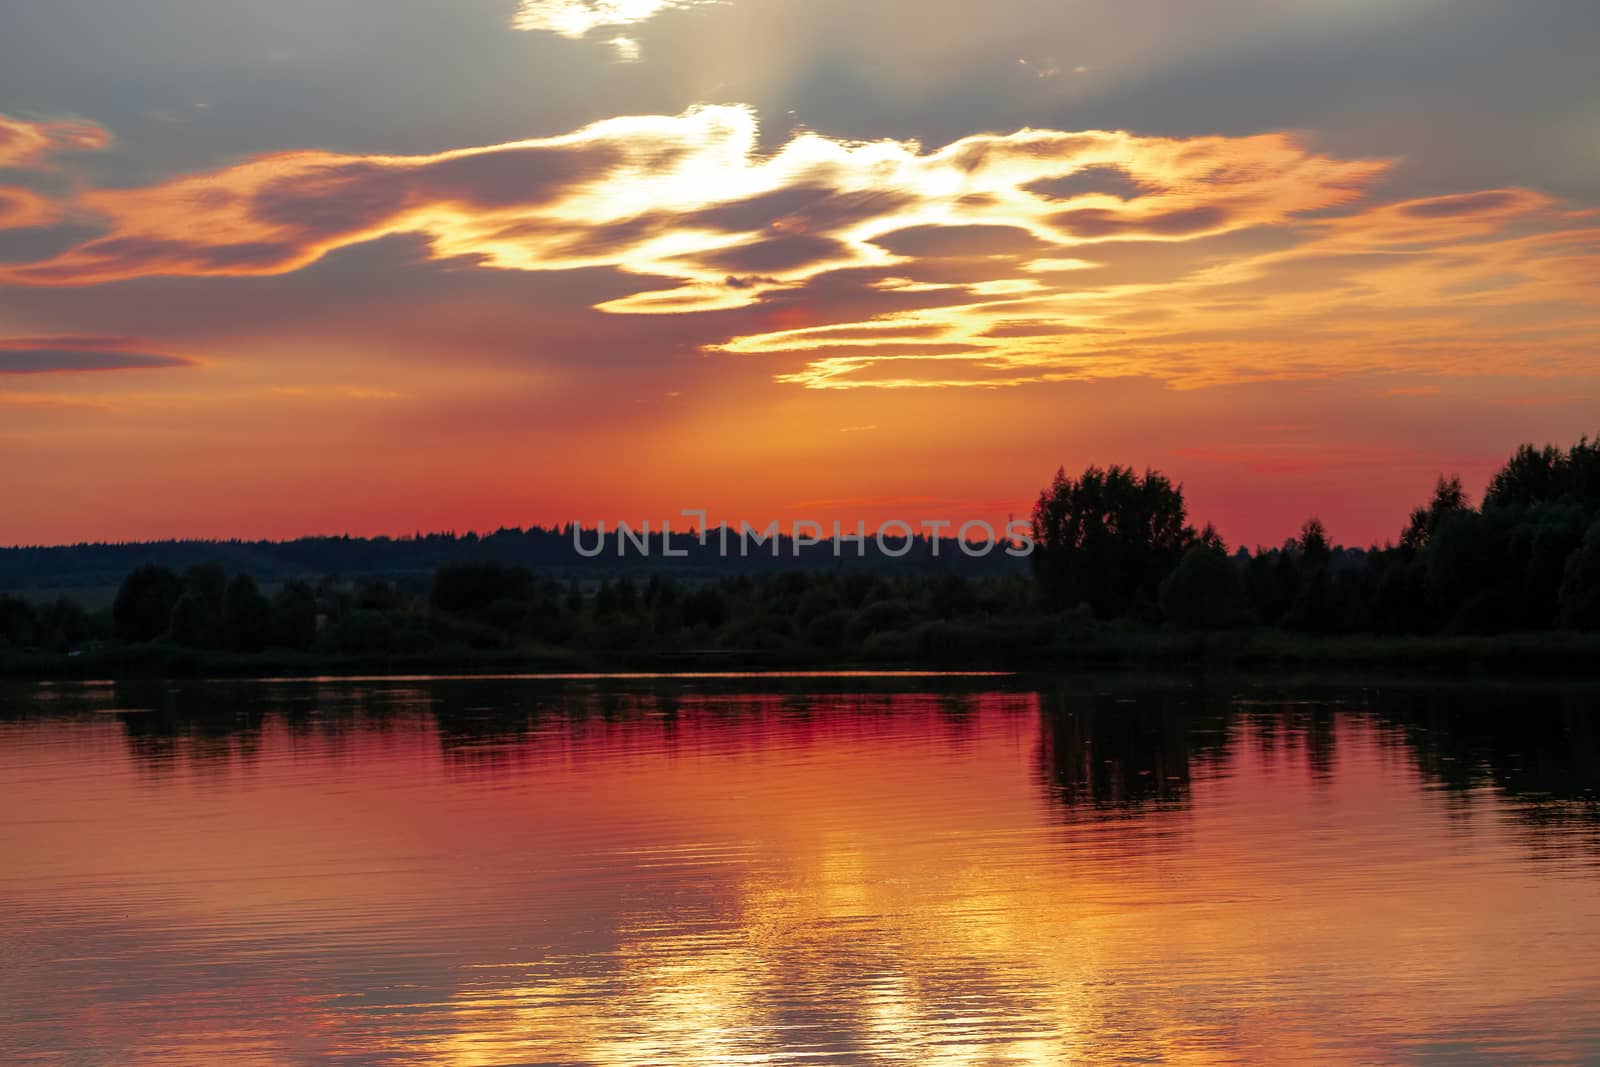 Panorama reflection of sunset in the water of the lake. The sky and clouds, illuminated by the sun setting over the horizon, acquired unusual red, orange and gray colors.